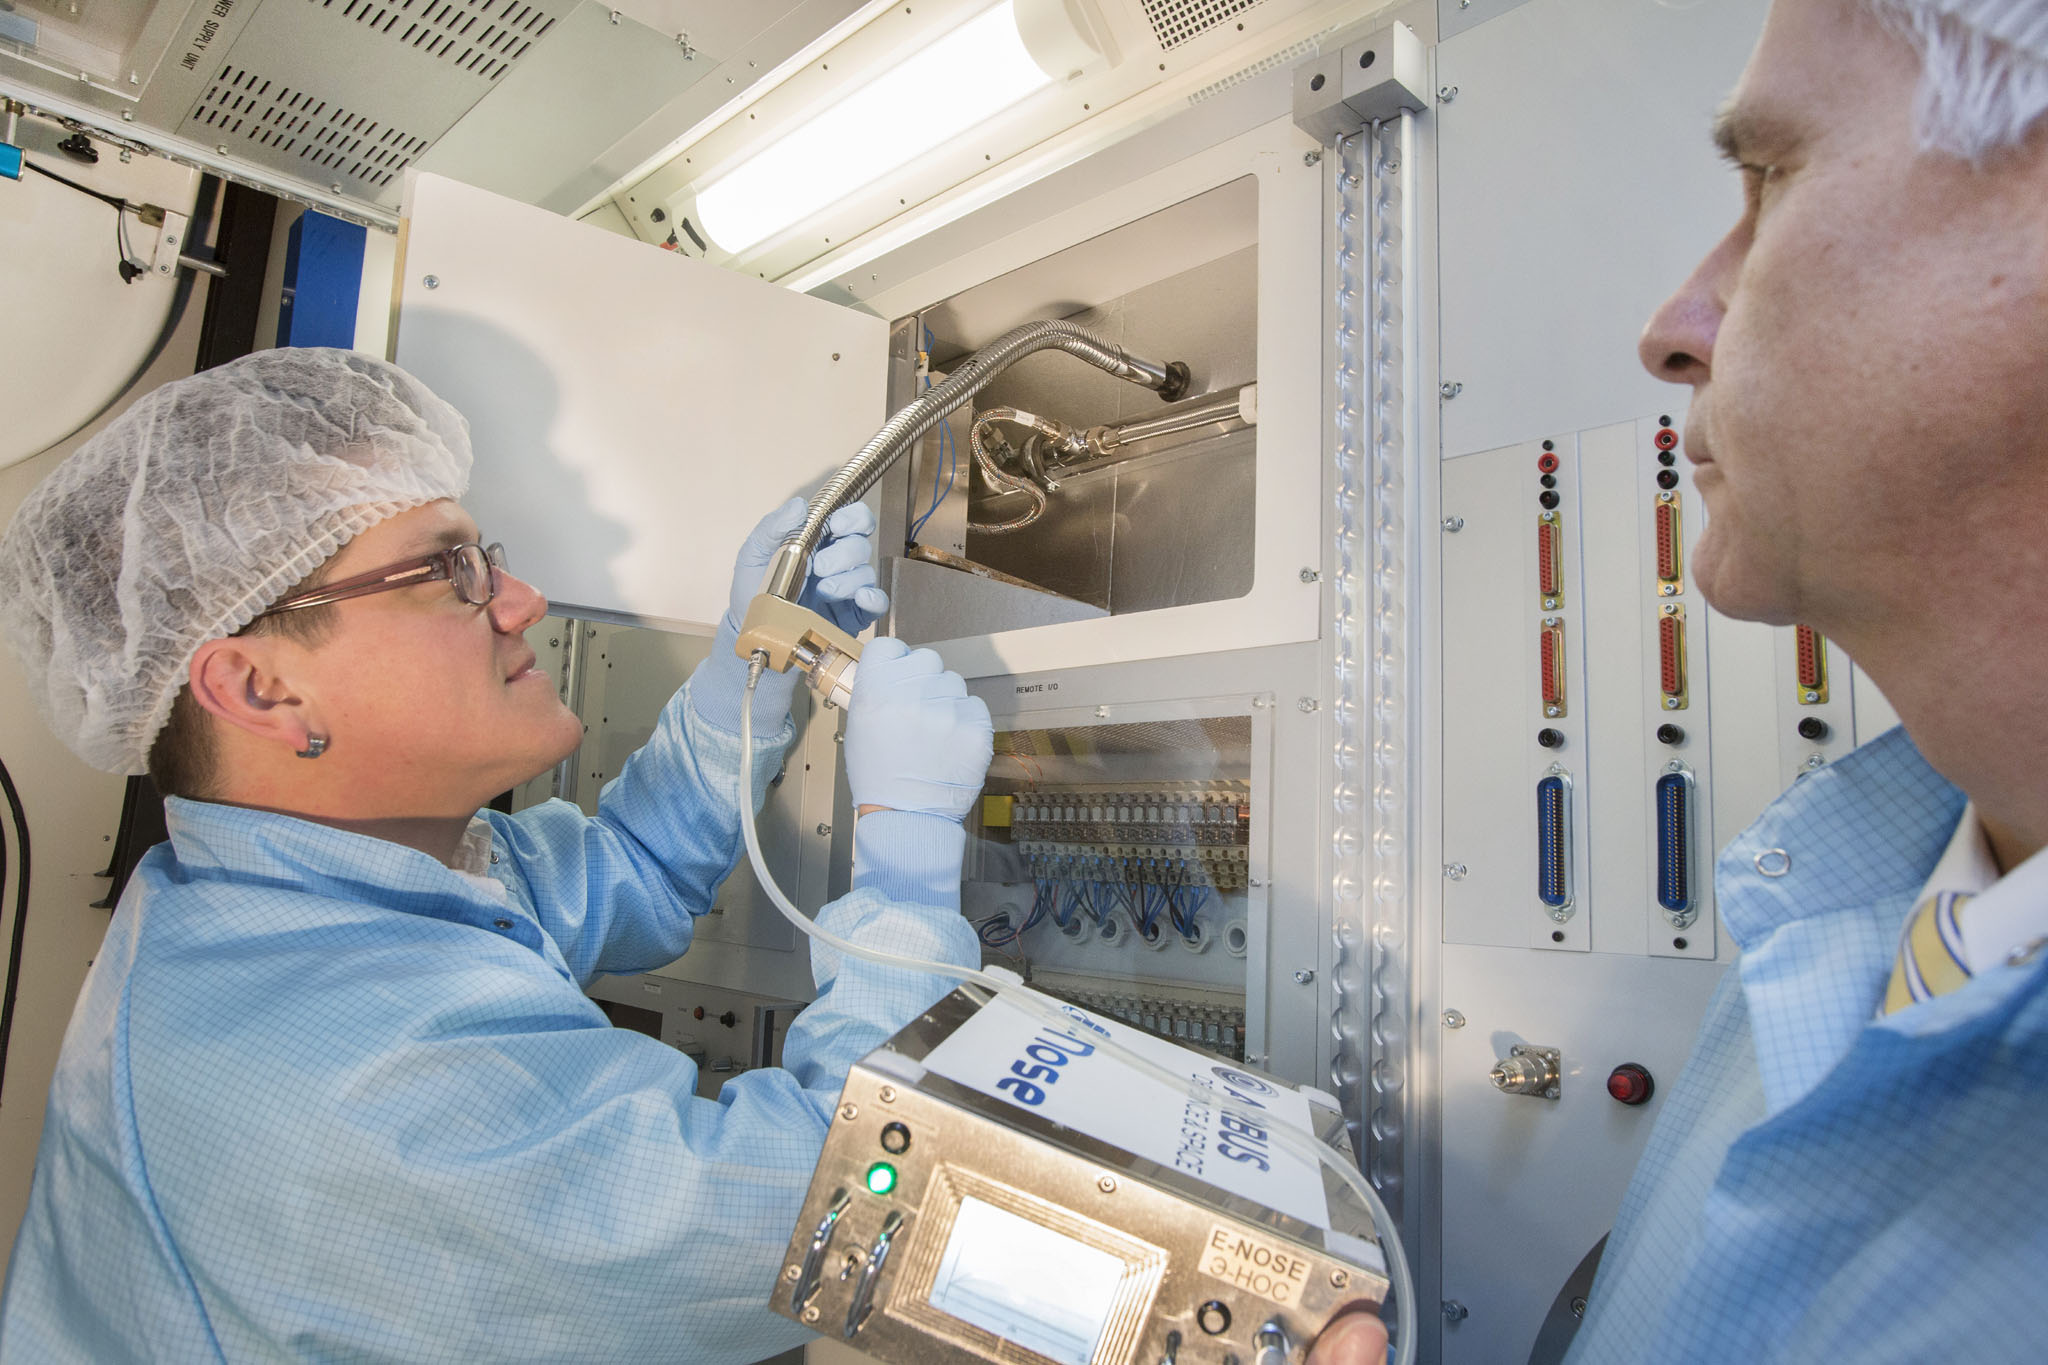 The new, trunk-like instrument of the ‘E-nose’ can detect micro-bacterial contamination in every corner of the Space Station. Viktor Fetter (left) and Thomas Hummel from Airbus Defence and Space take samples in an ISS ground module. © Airbus DS GmbH